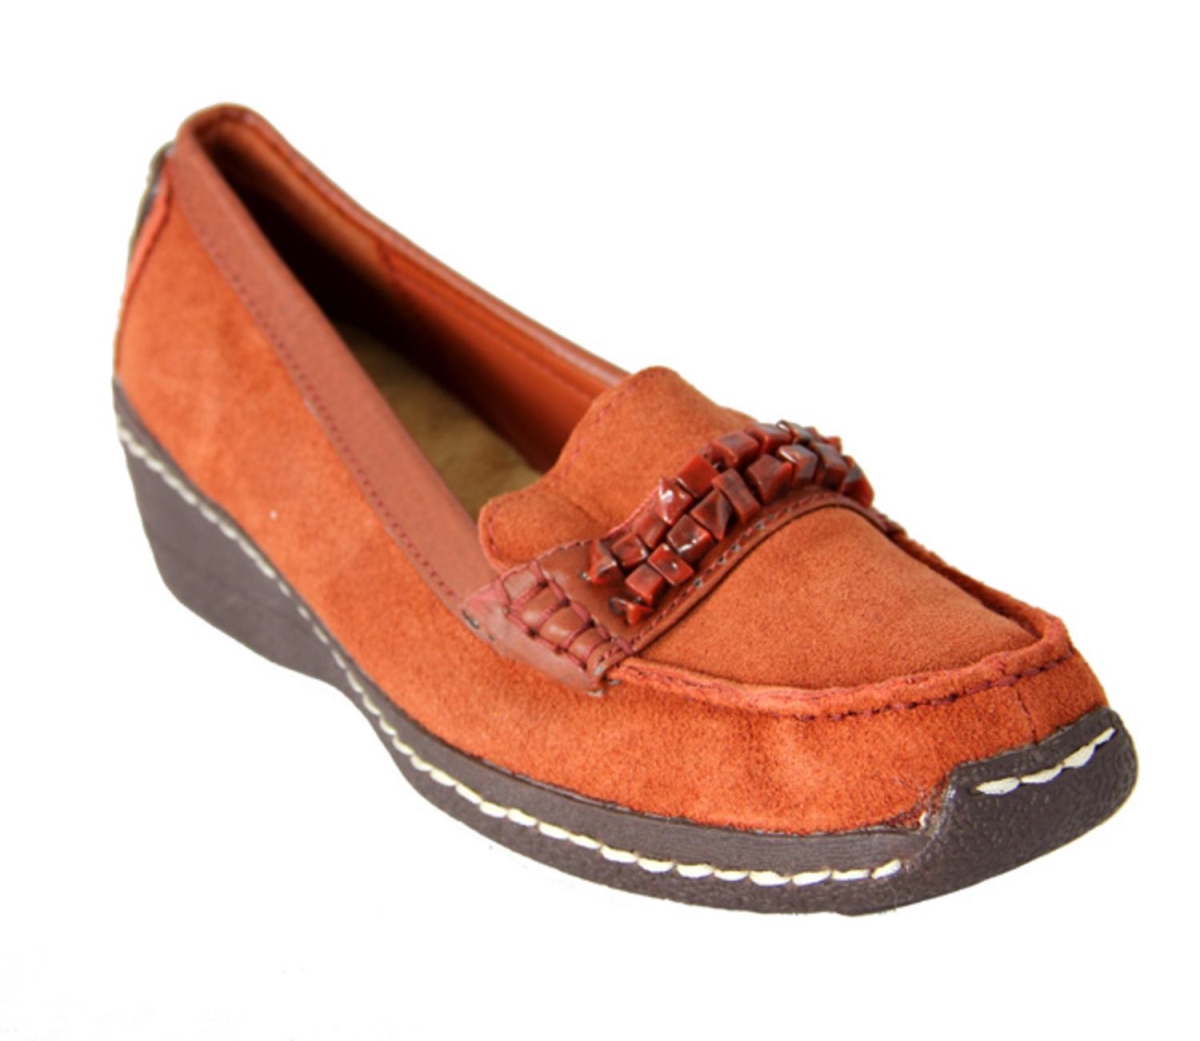 Picture of Avon 28864565 Womens Orange Suede Cushion Wedge Shoes with Stone Strap Accent - Size 6